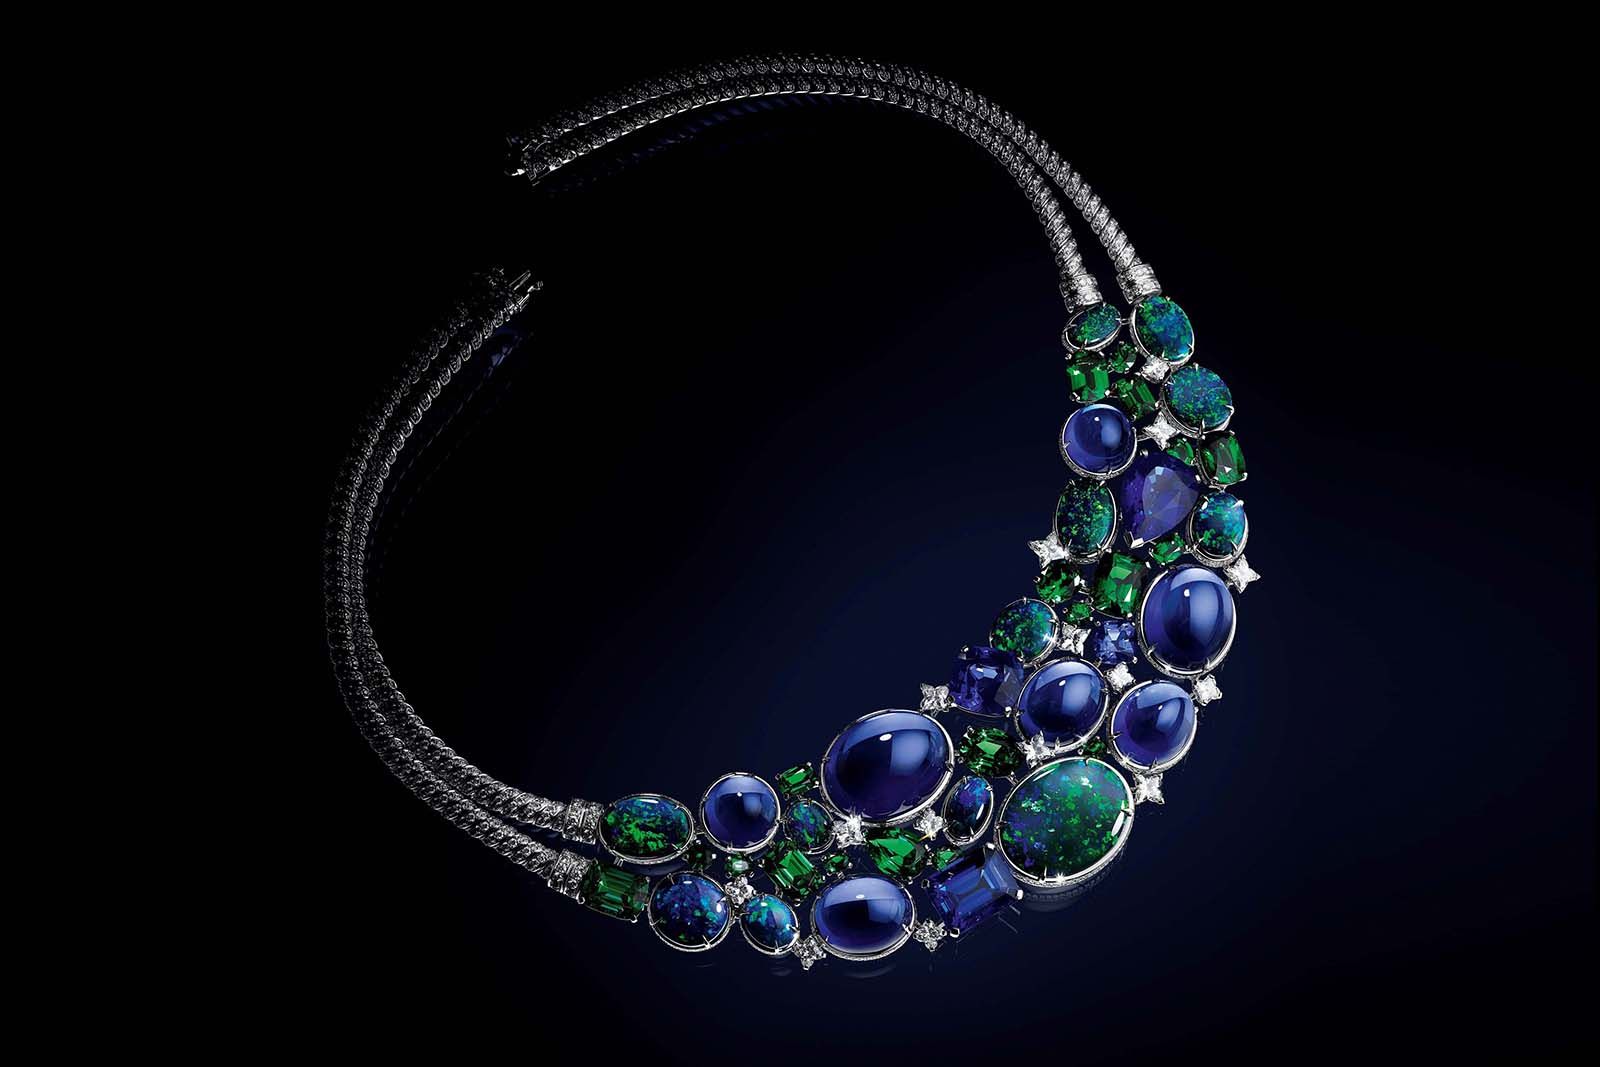 Opulent New Jewelry Featuring Iridescent Opals – The Hollywood